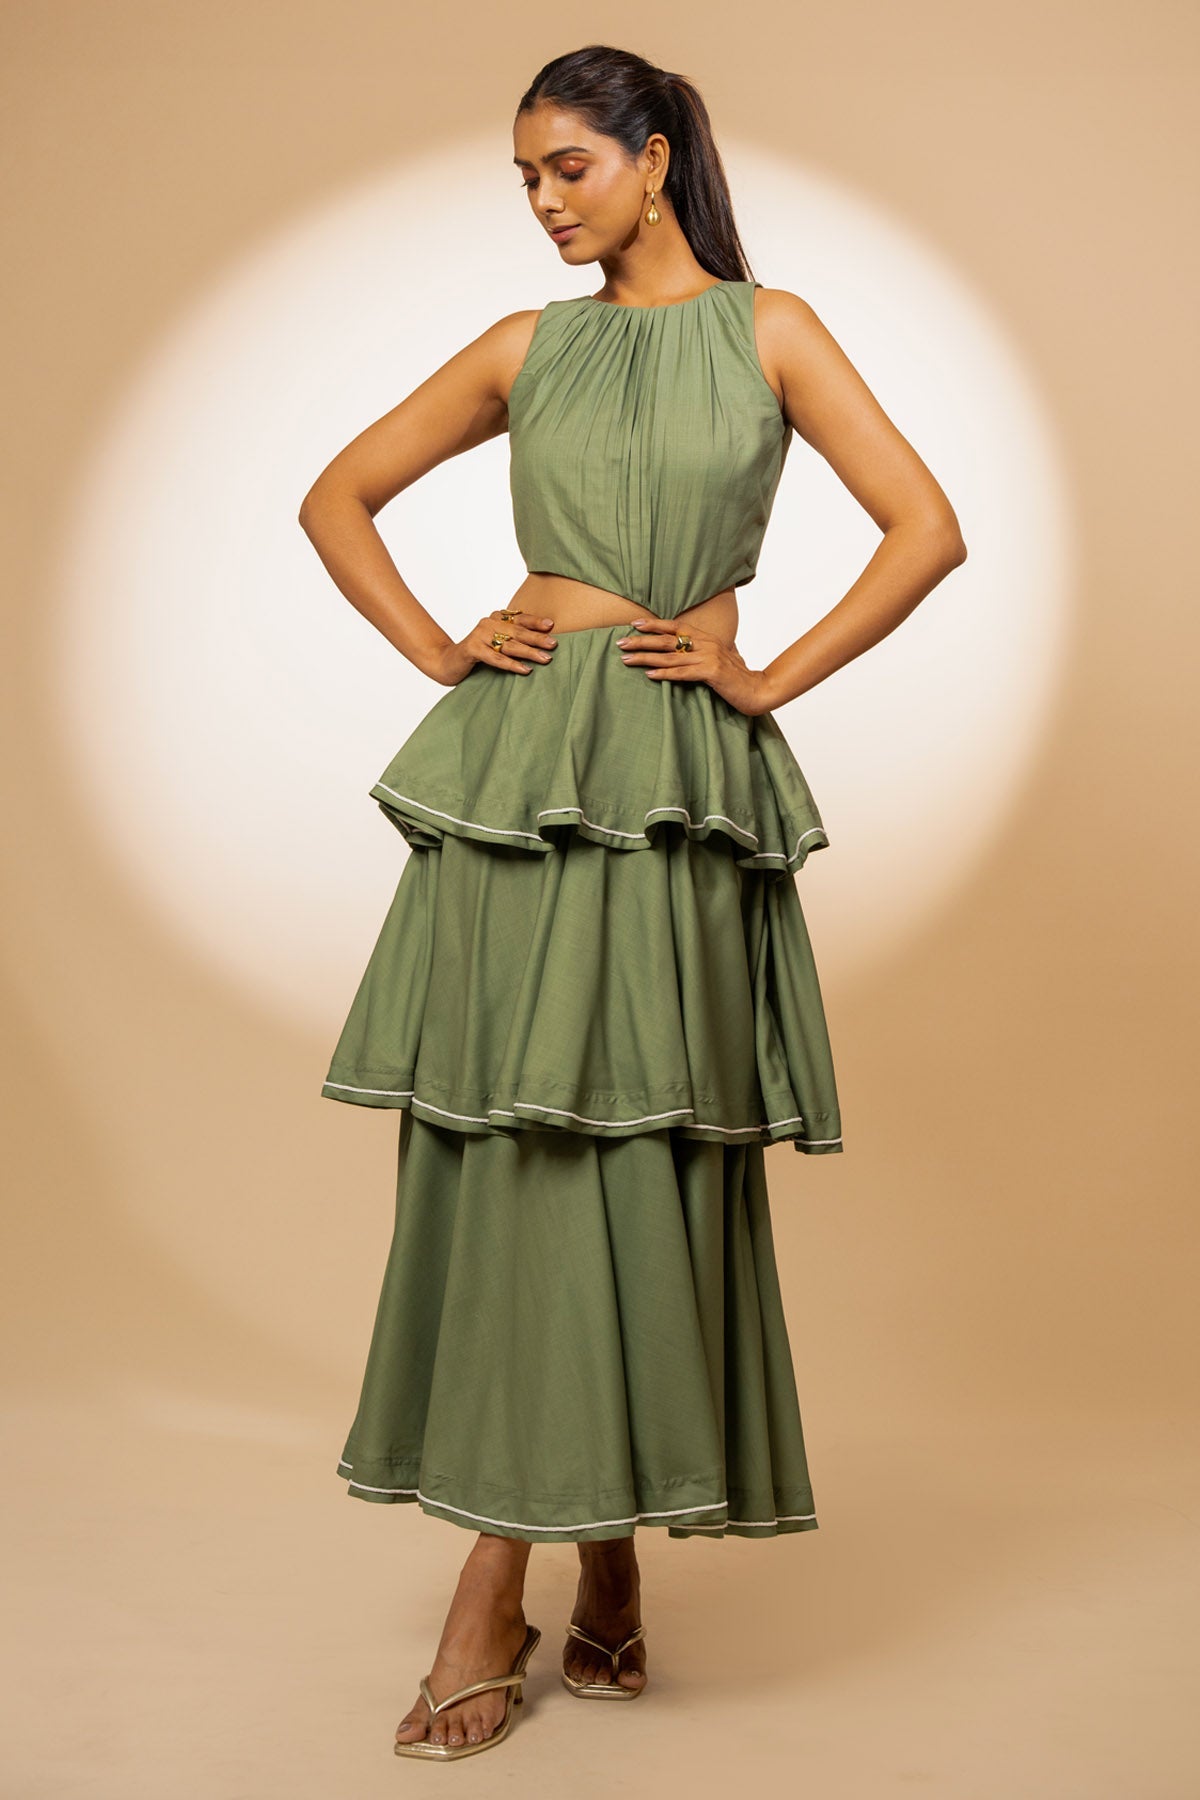 The Decem Ally Green Linen Layered Maxi Dress for Women online available at scrollnshops